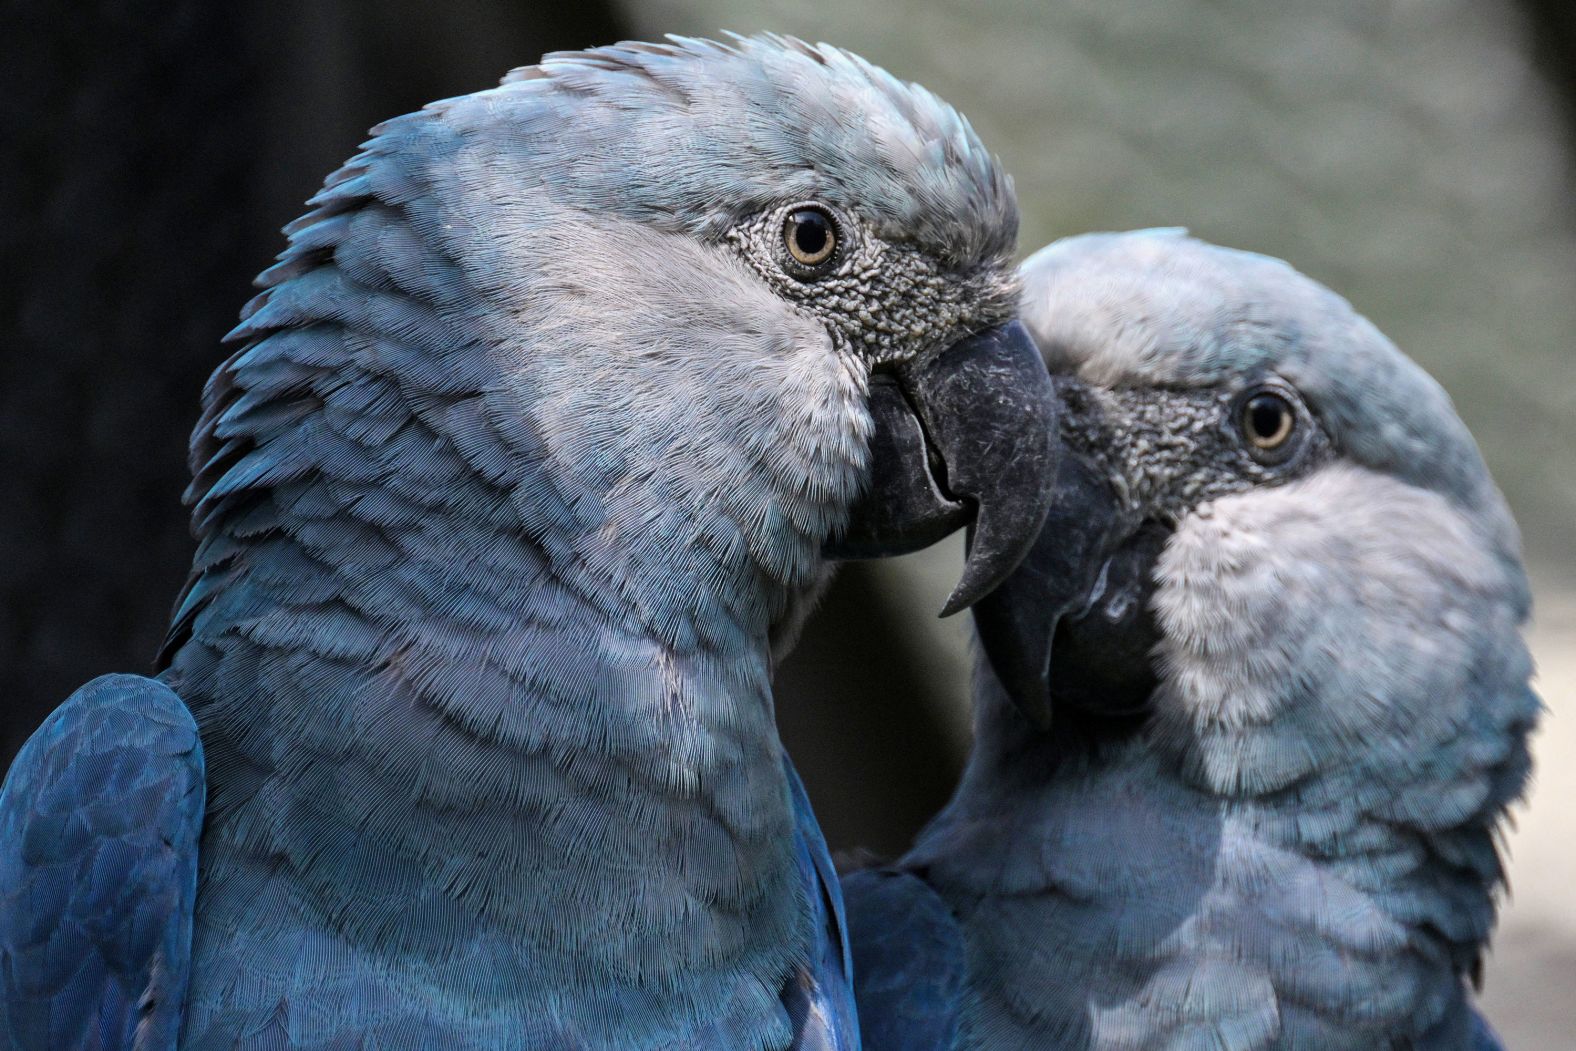 Two Spix's macaws are seen at the São Paulo Zoo in São Paulo, Brazil, on Friday, May 3. The species is one of the most threatened in Brazil.